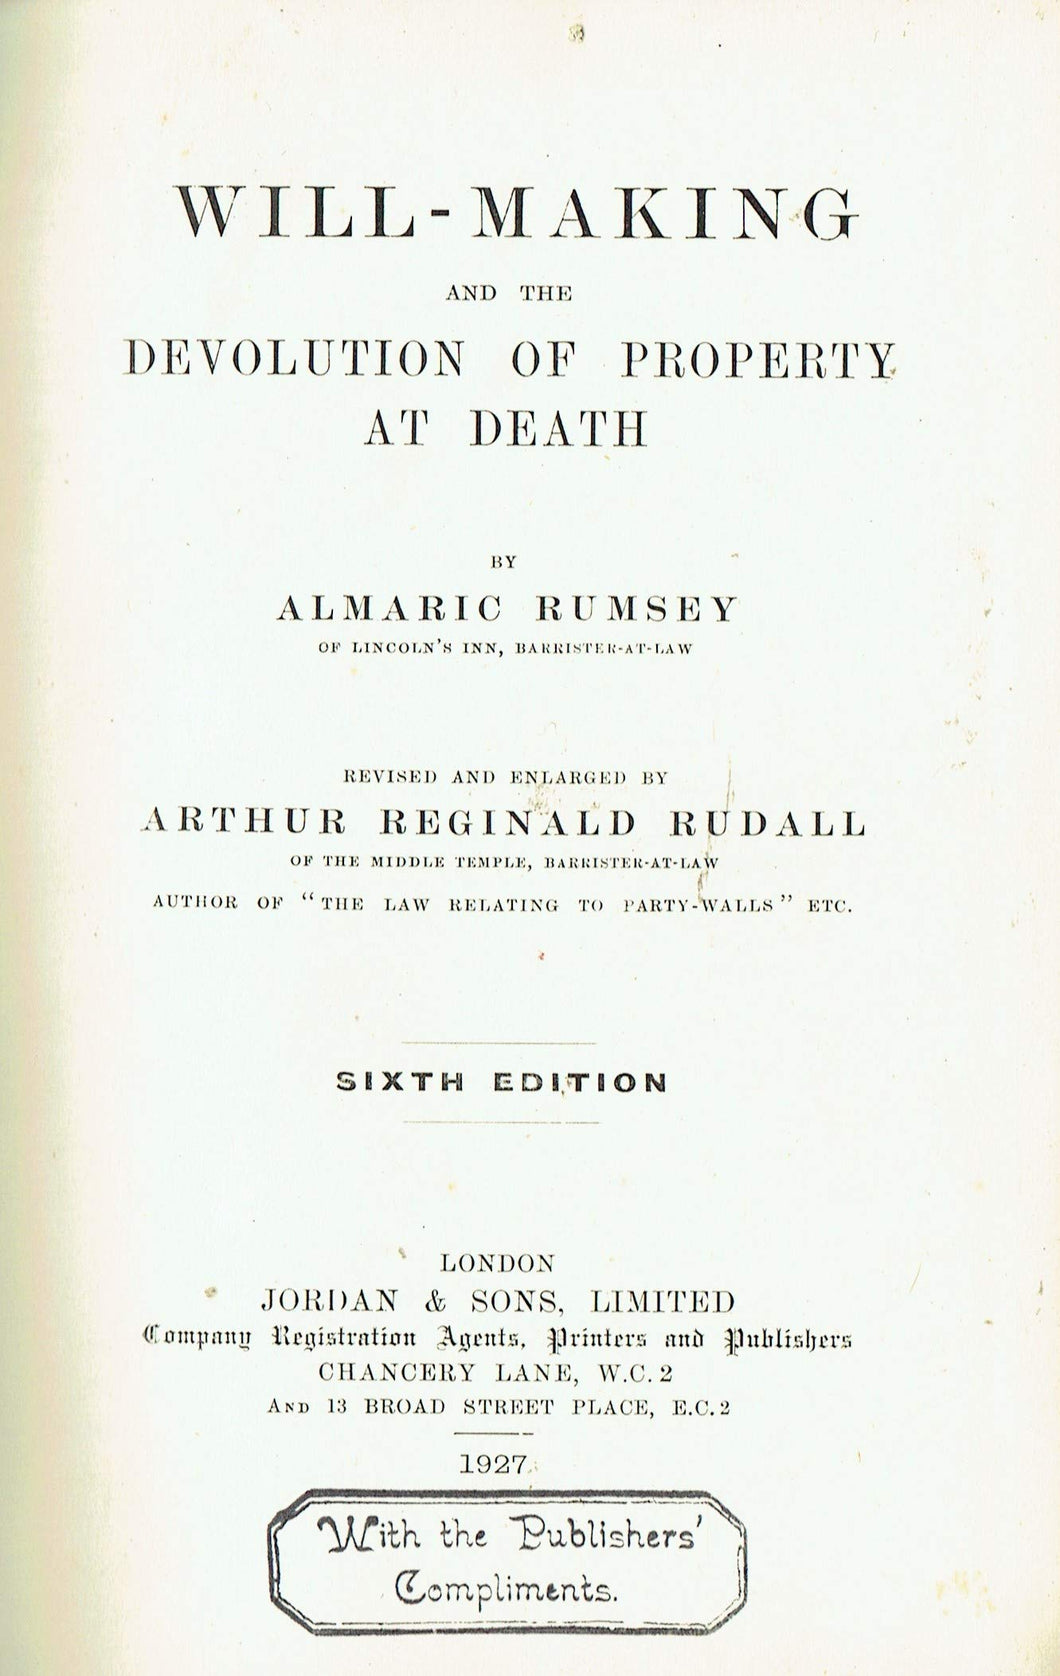 Will-Making and the Devolution of Property at Death - Sixth Edition